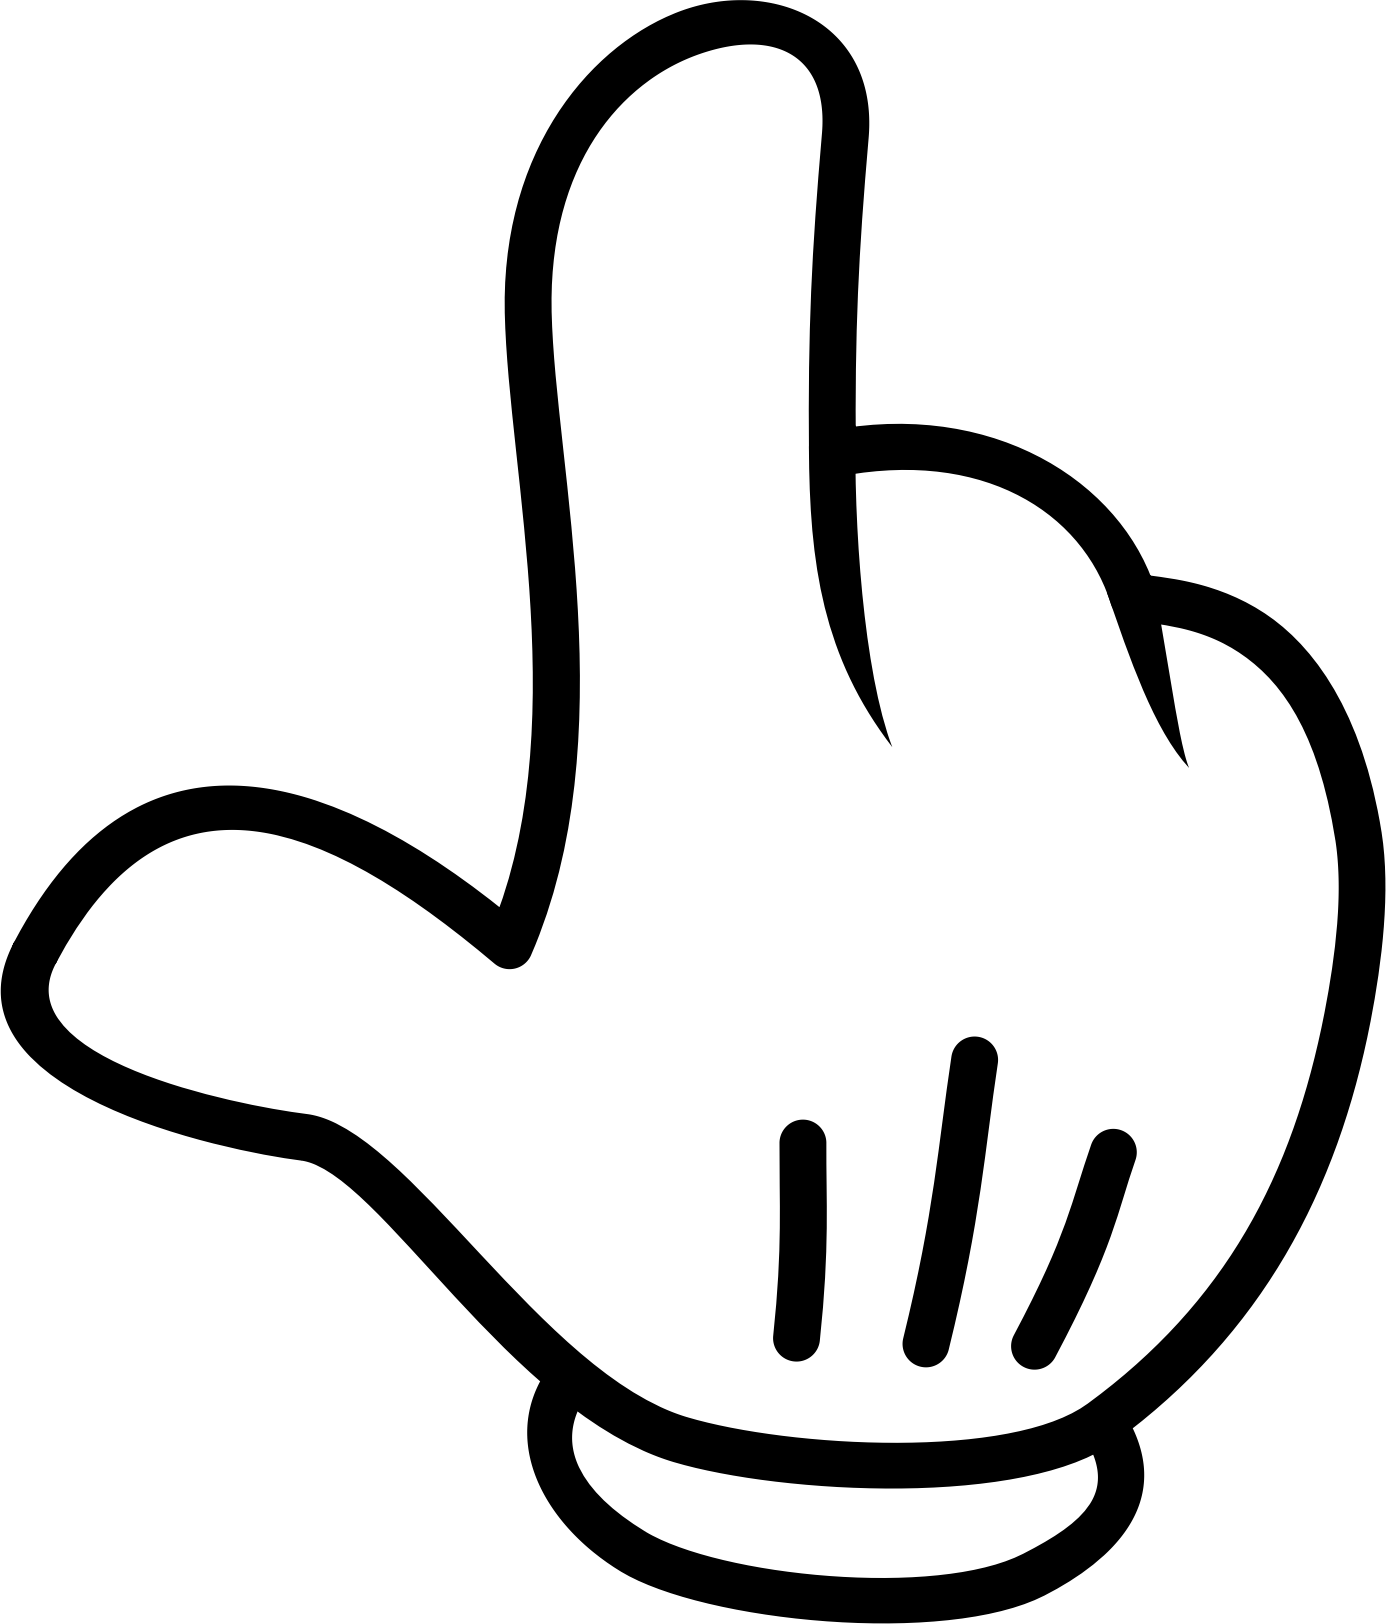 Big Image (Png) - Pointing Finger, Transparent background PNG HD thumbnail